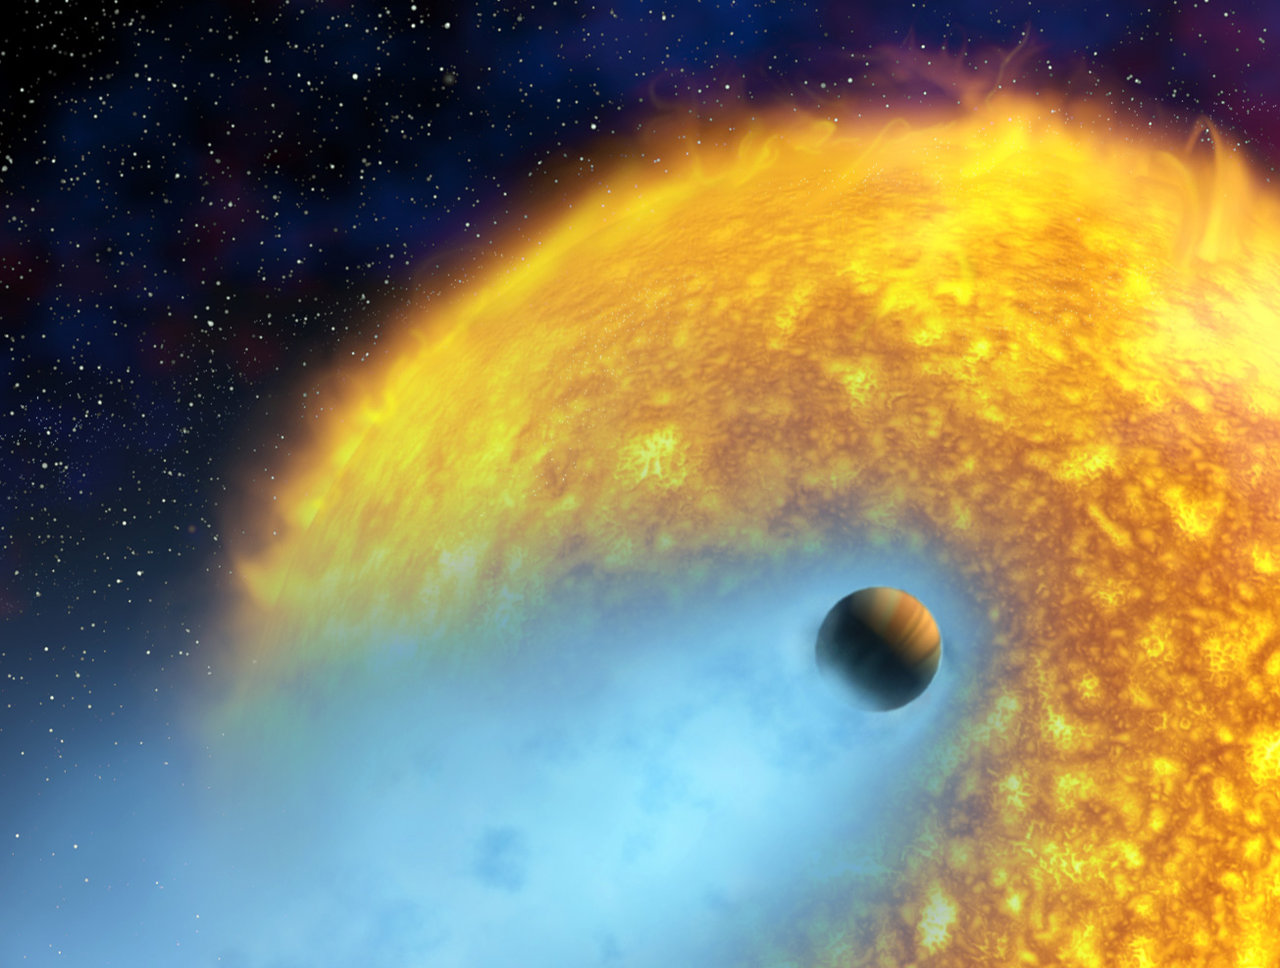 An artist's conception of HD 209458 b, an exoplanet whose atmosphere is being torn off at more than 35,000 km/hour by the radiation of its close-by parent star. This hot Jupiter was the first alien world discovered via the transit method, and the first planet to have its atmosphere studied. Image credit: NASA/European Space Agency/Alfred Vidal-Madjar (Institut d'Astrophysique de Paris, CNRS)